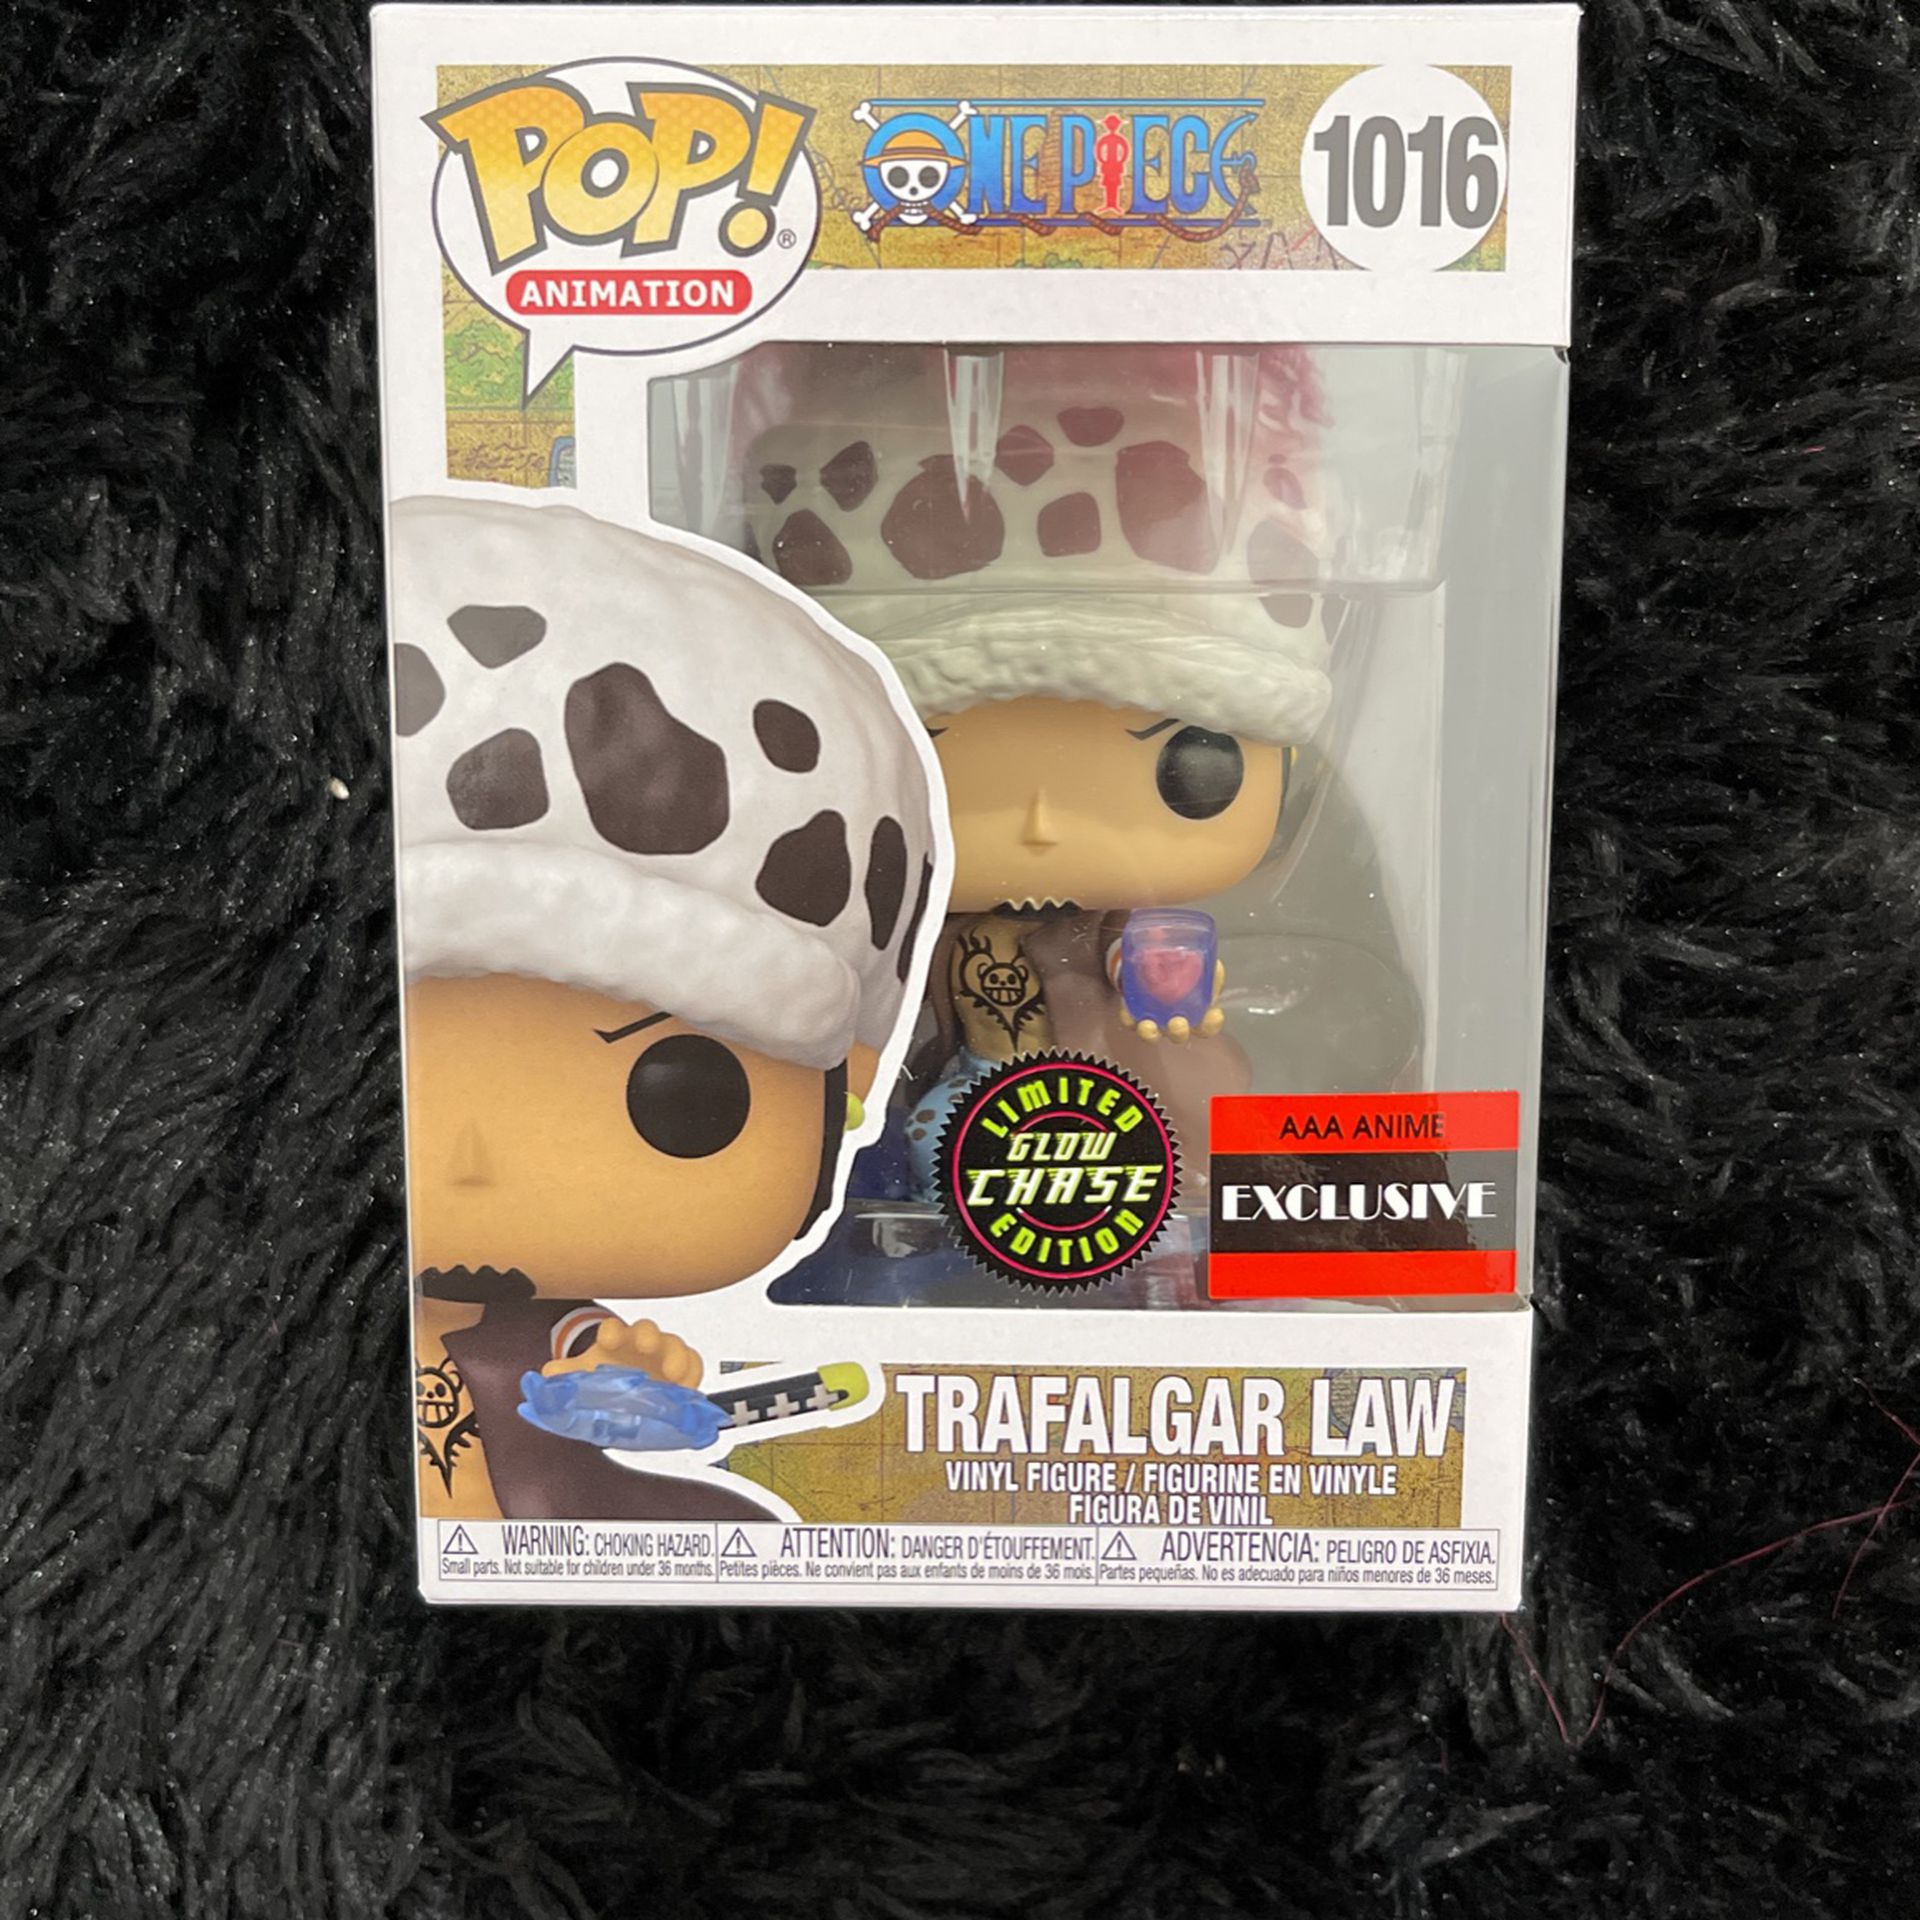 One Piece Trafalgar Law Room Attack Pop! Vinyl Figure - AAA Anime Exclusive CHASE